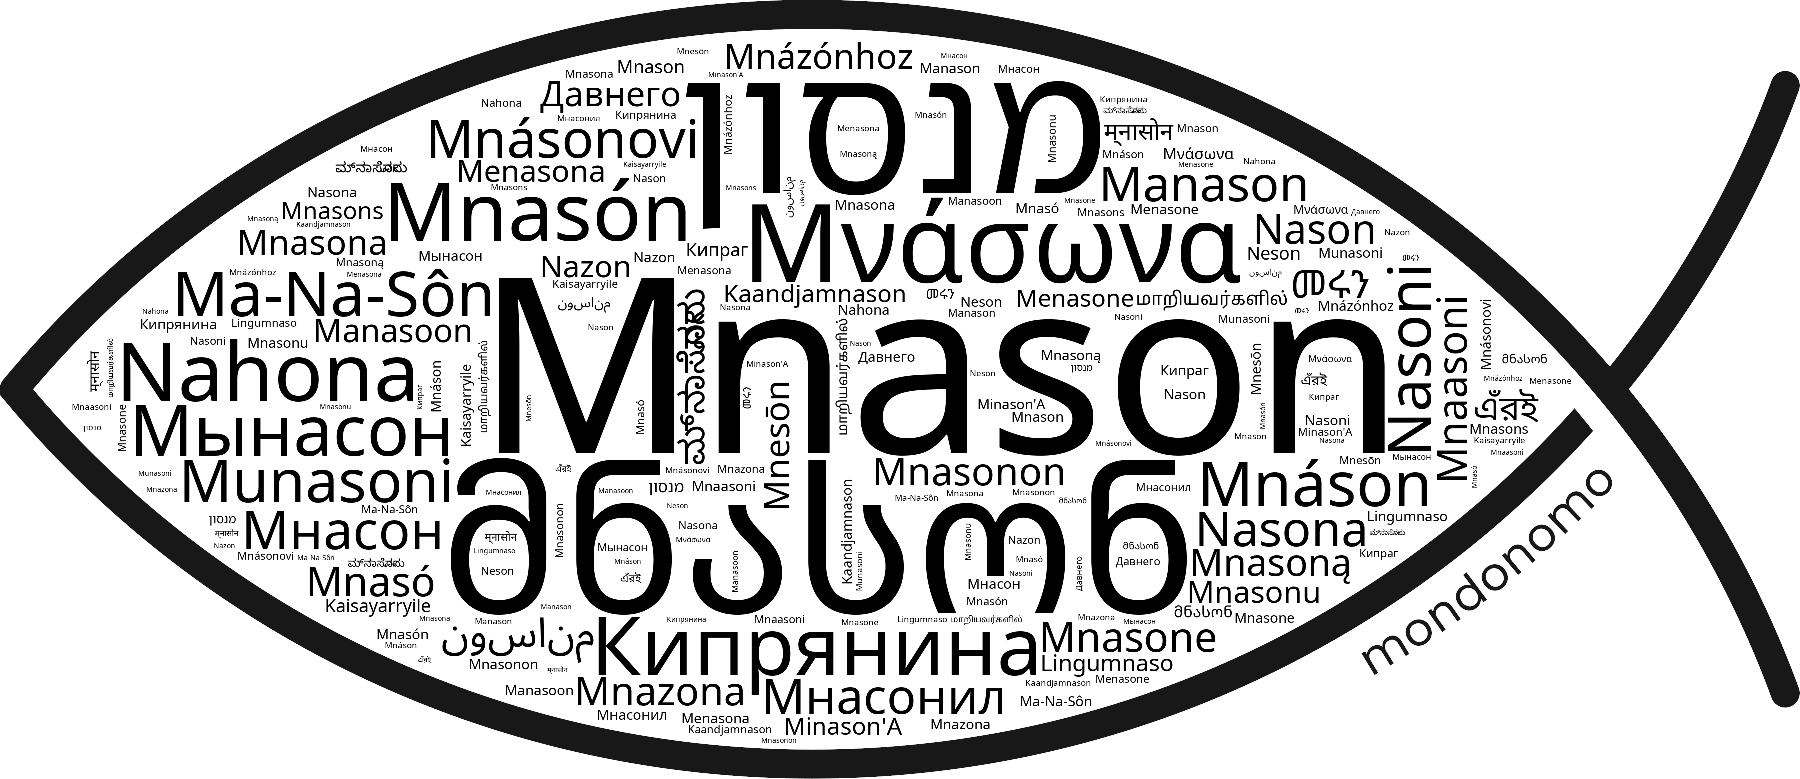 Name Mnason in the world's Bibles